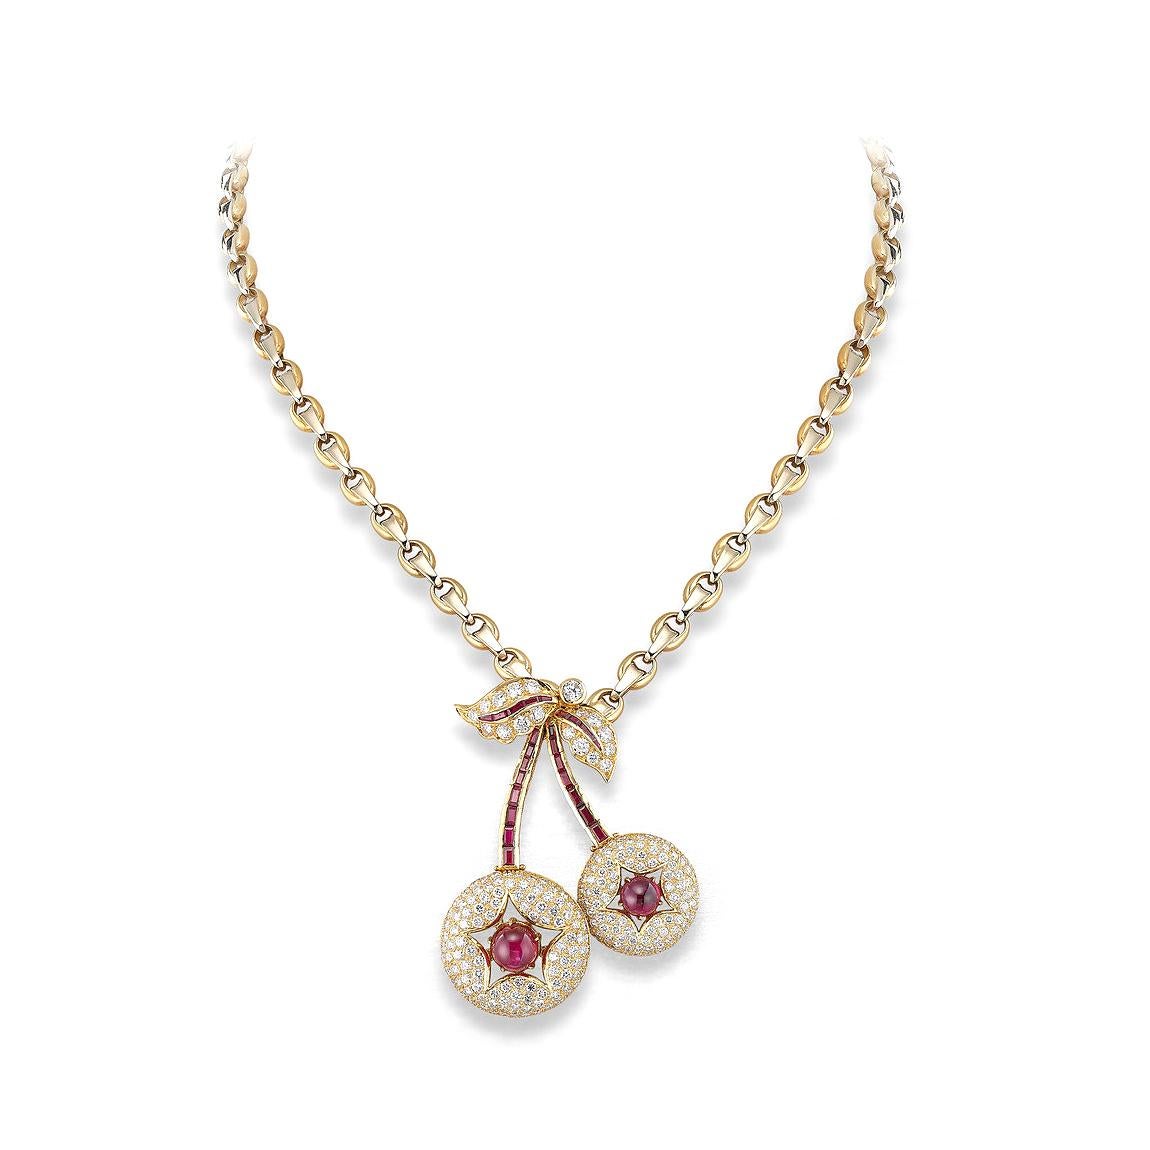 Cherry pendant in 18kt yellow gold set with diamonds 6.07 cts and cabochon and tapers cut rubies 8.53 cts with necklace in 18kt yellow and white gold        